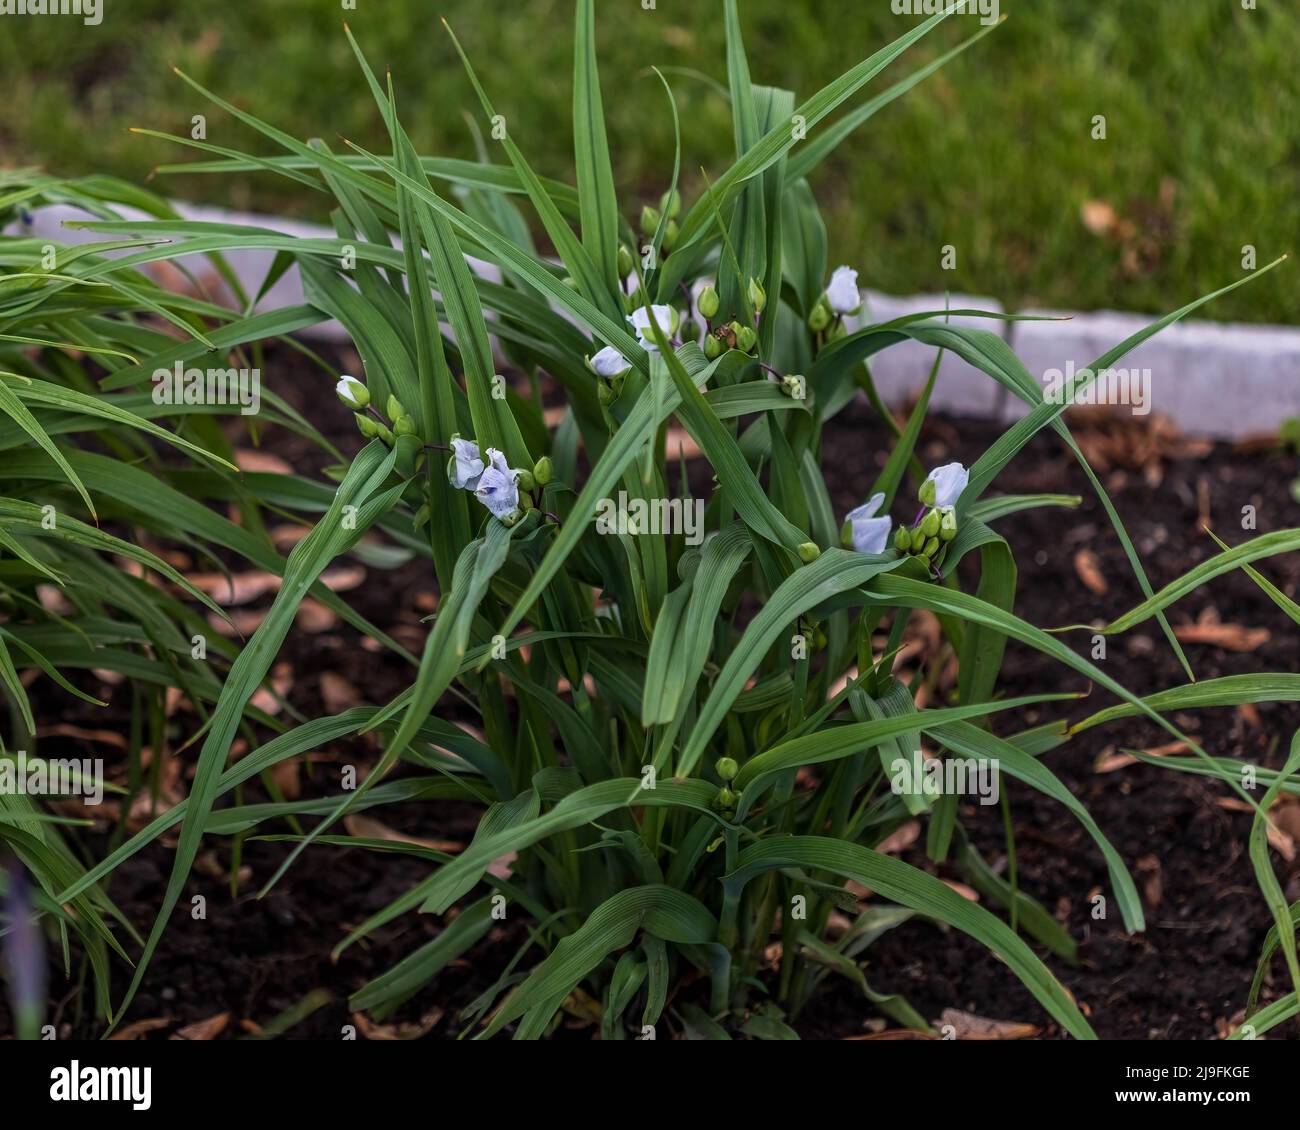 white Widows Tears plant blooms in the front garden Stock Photo